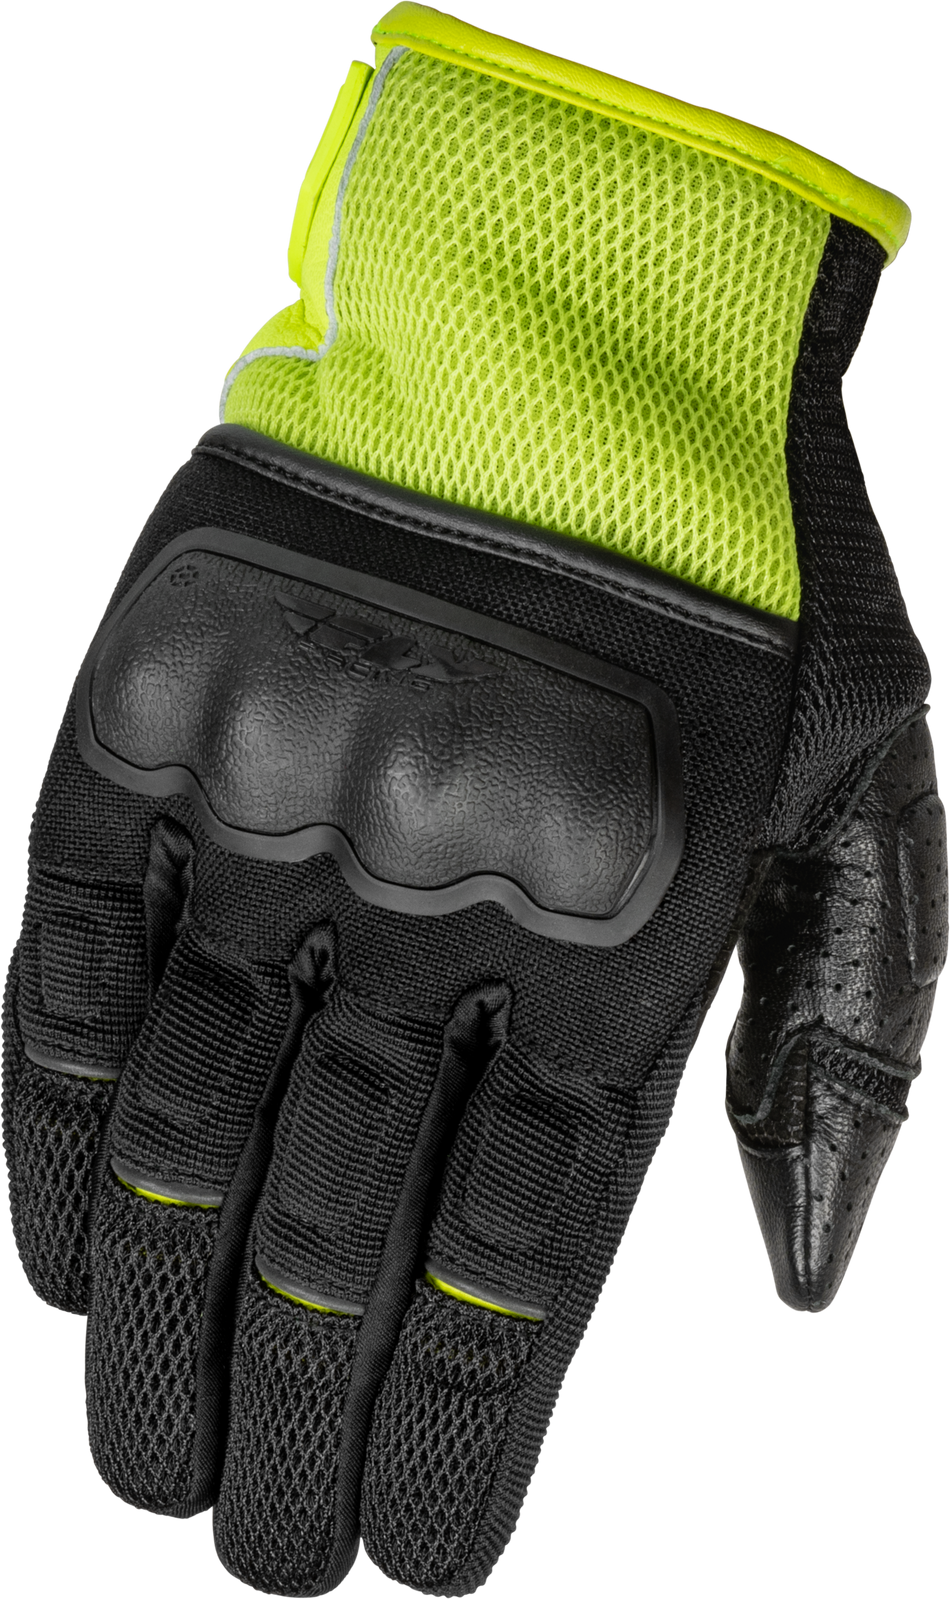 FLY RACING Coolpro Force Gloves Black/Hi-Vis Xl 476-4128X